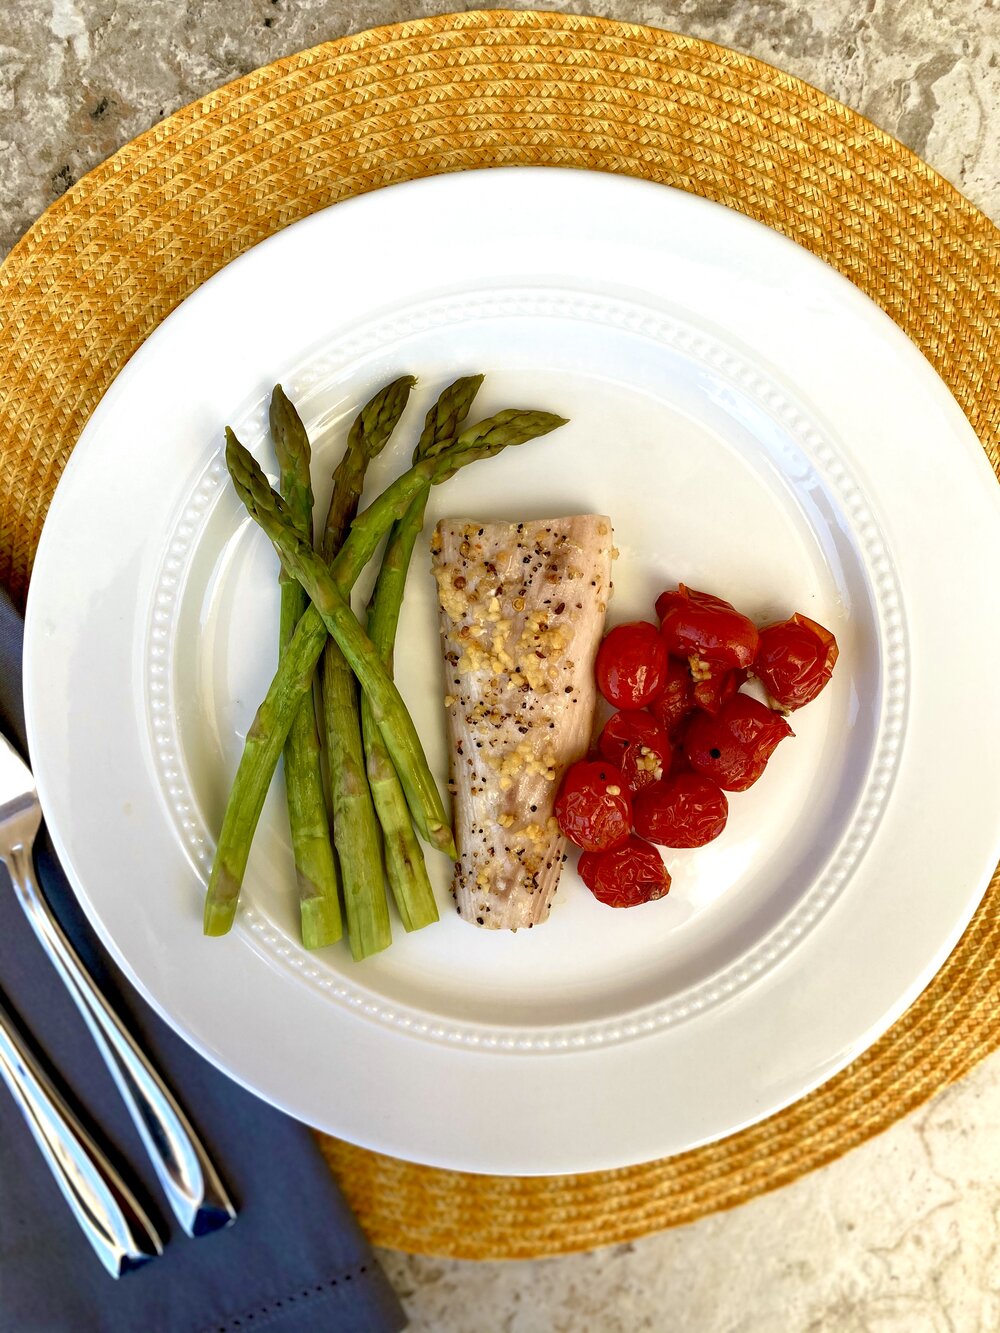 baked fish with lemon and roasted tomatoes.jpg